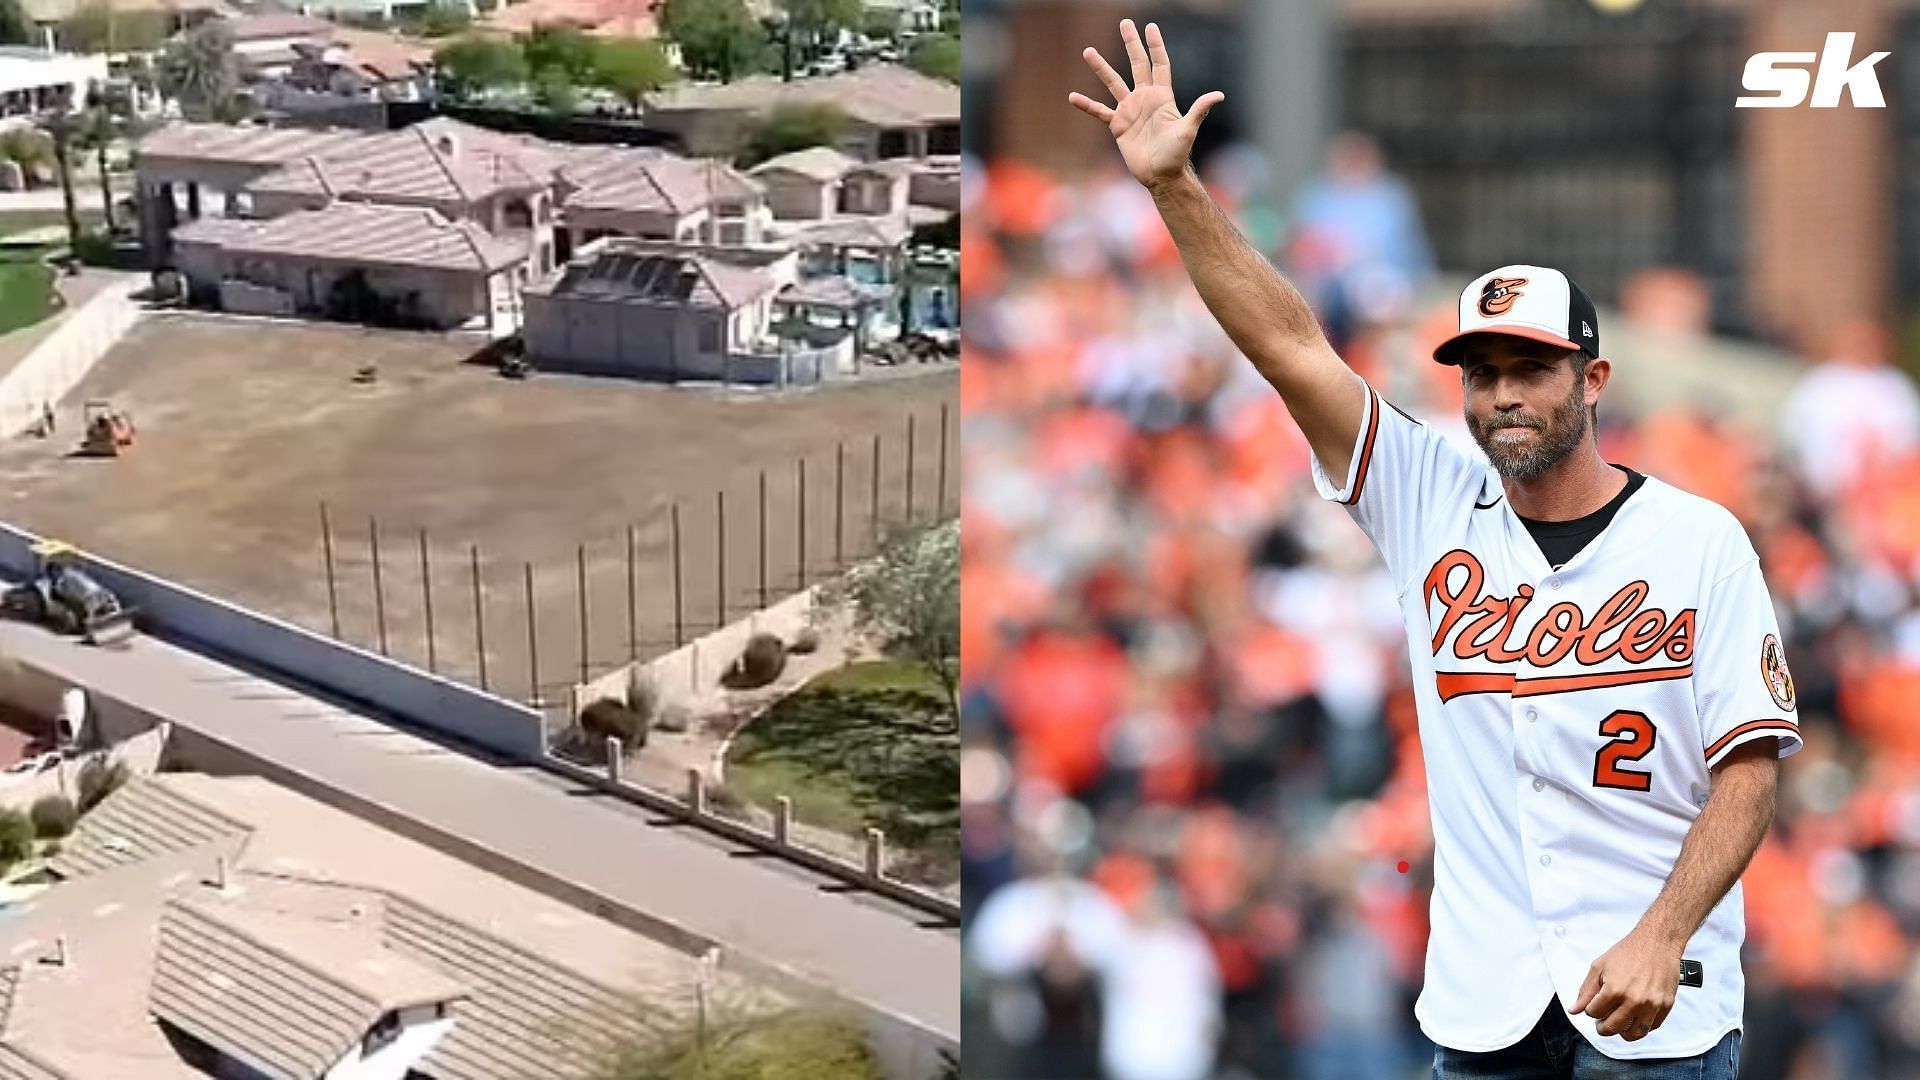 Former MLB star JJ Hardy has displeased neighbors after attempting to install a ballpark at his Arizona home